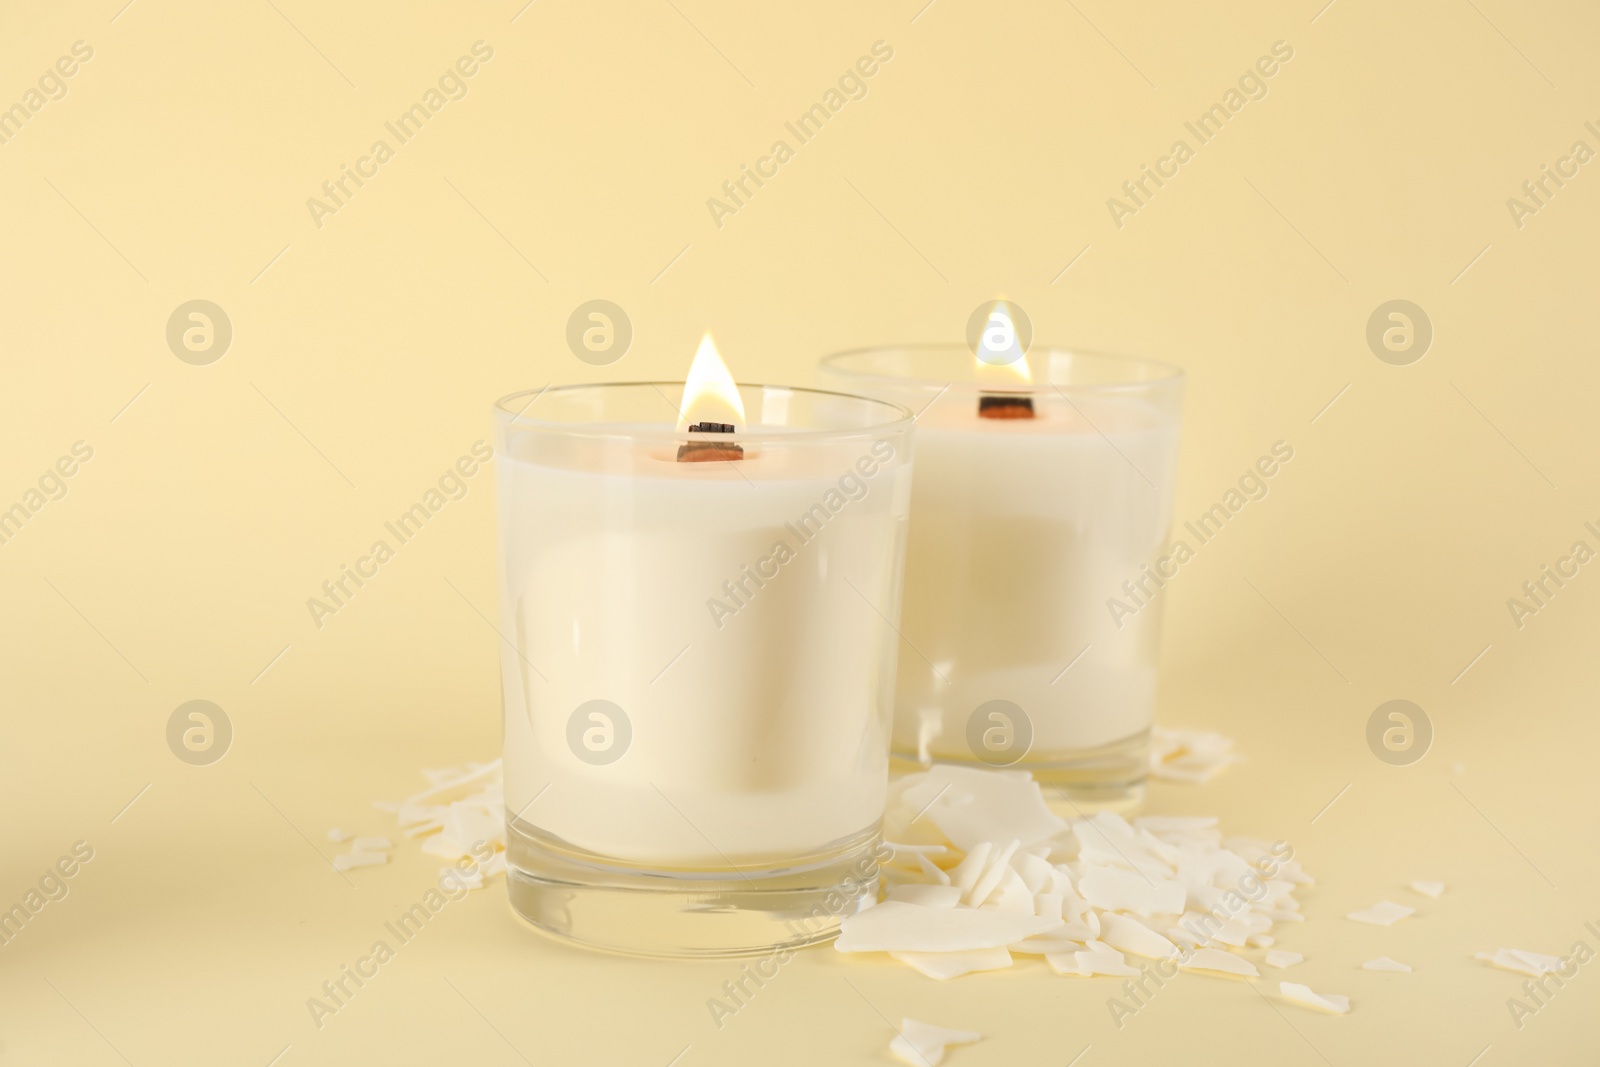 Photo of Burning soy candles and wax flakes on beige background